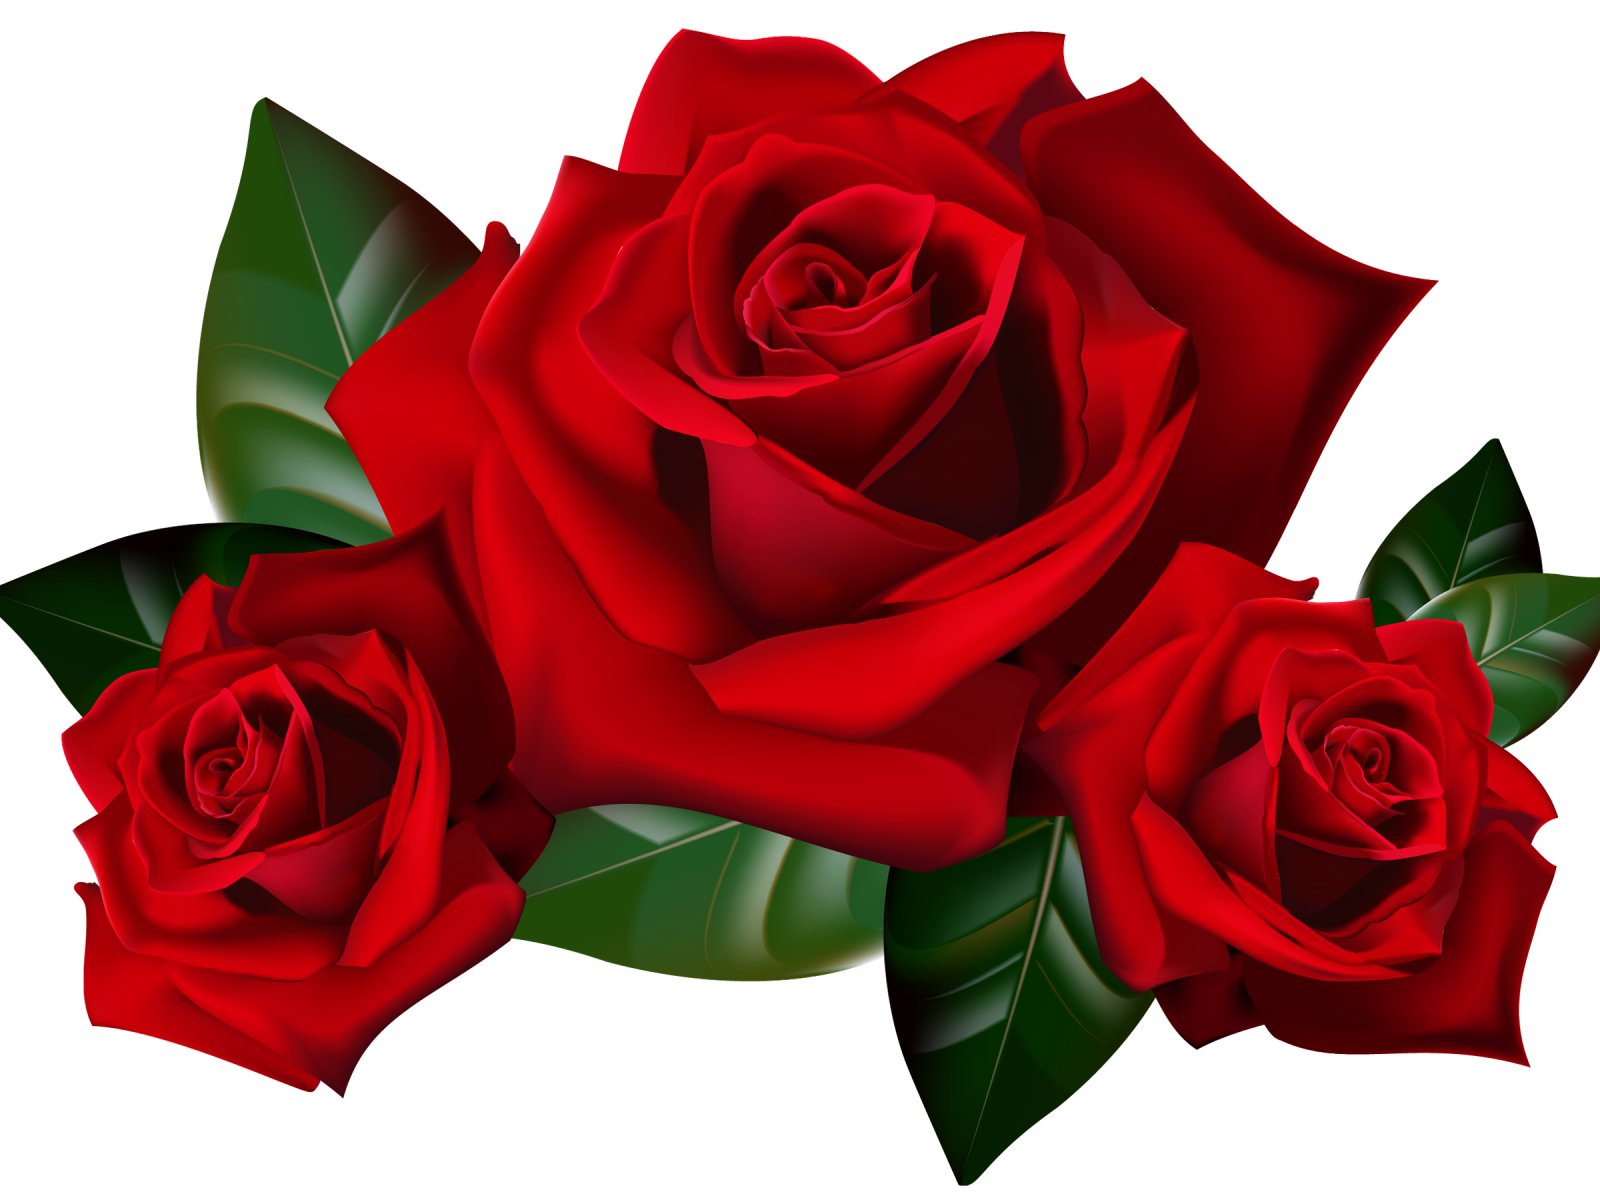 red roses photo hq mothers, valentine, lovers image #40644